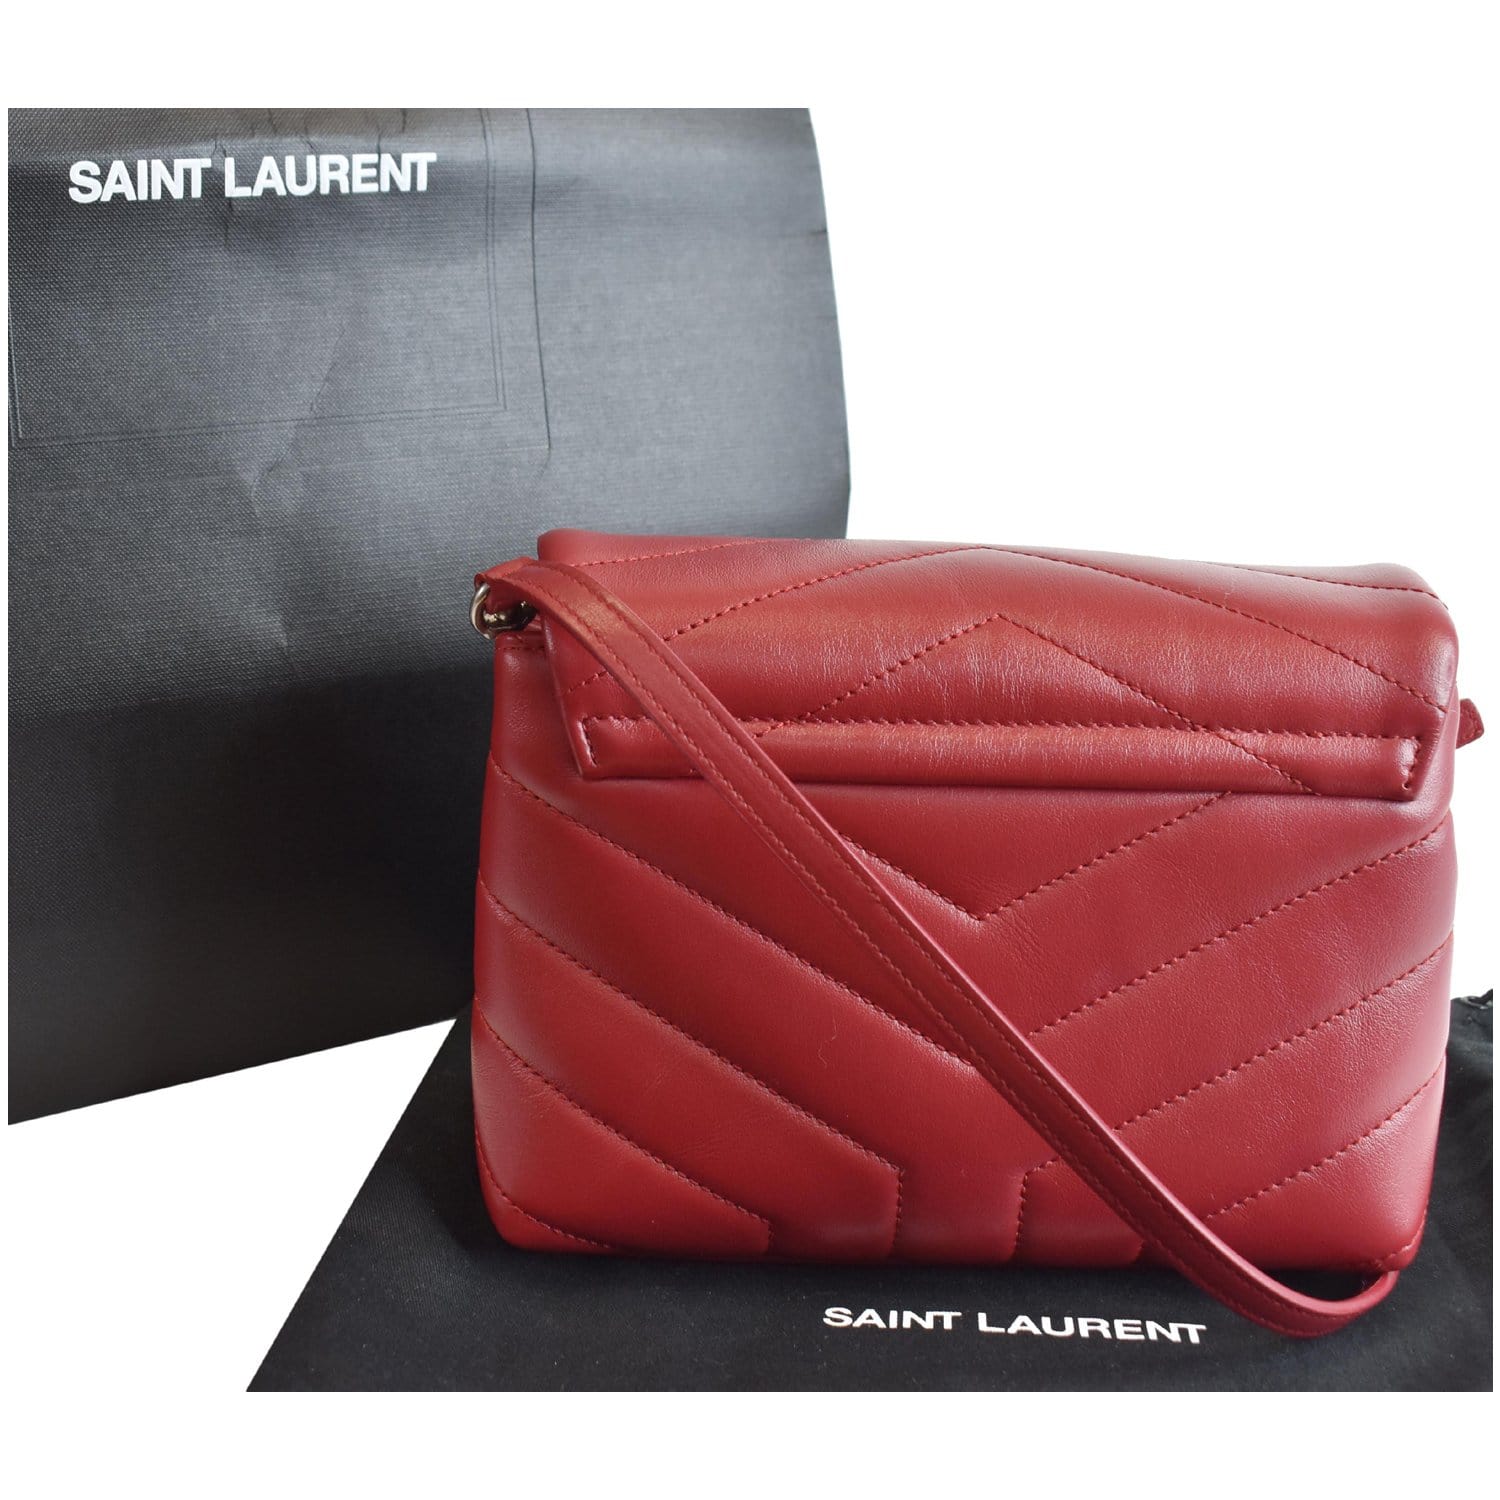 YVES SAINT LAURENT Loulou Toy Matelasse Leather Crossbody Bag Red - 15